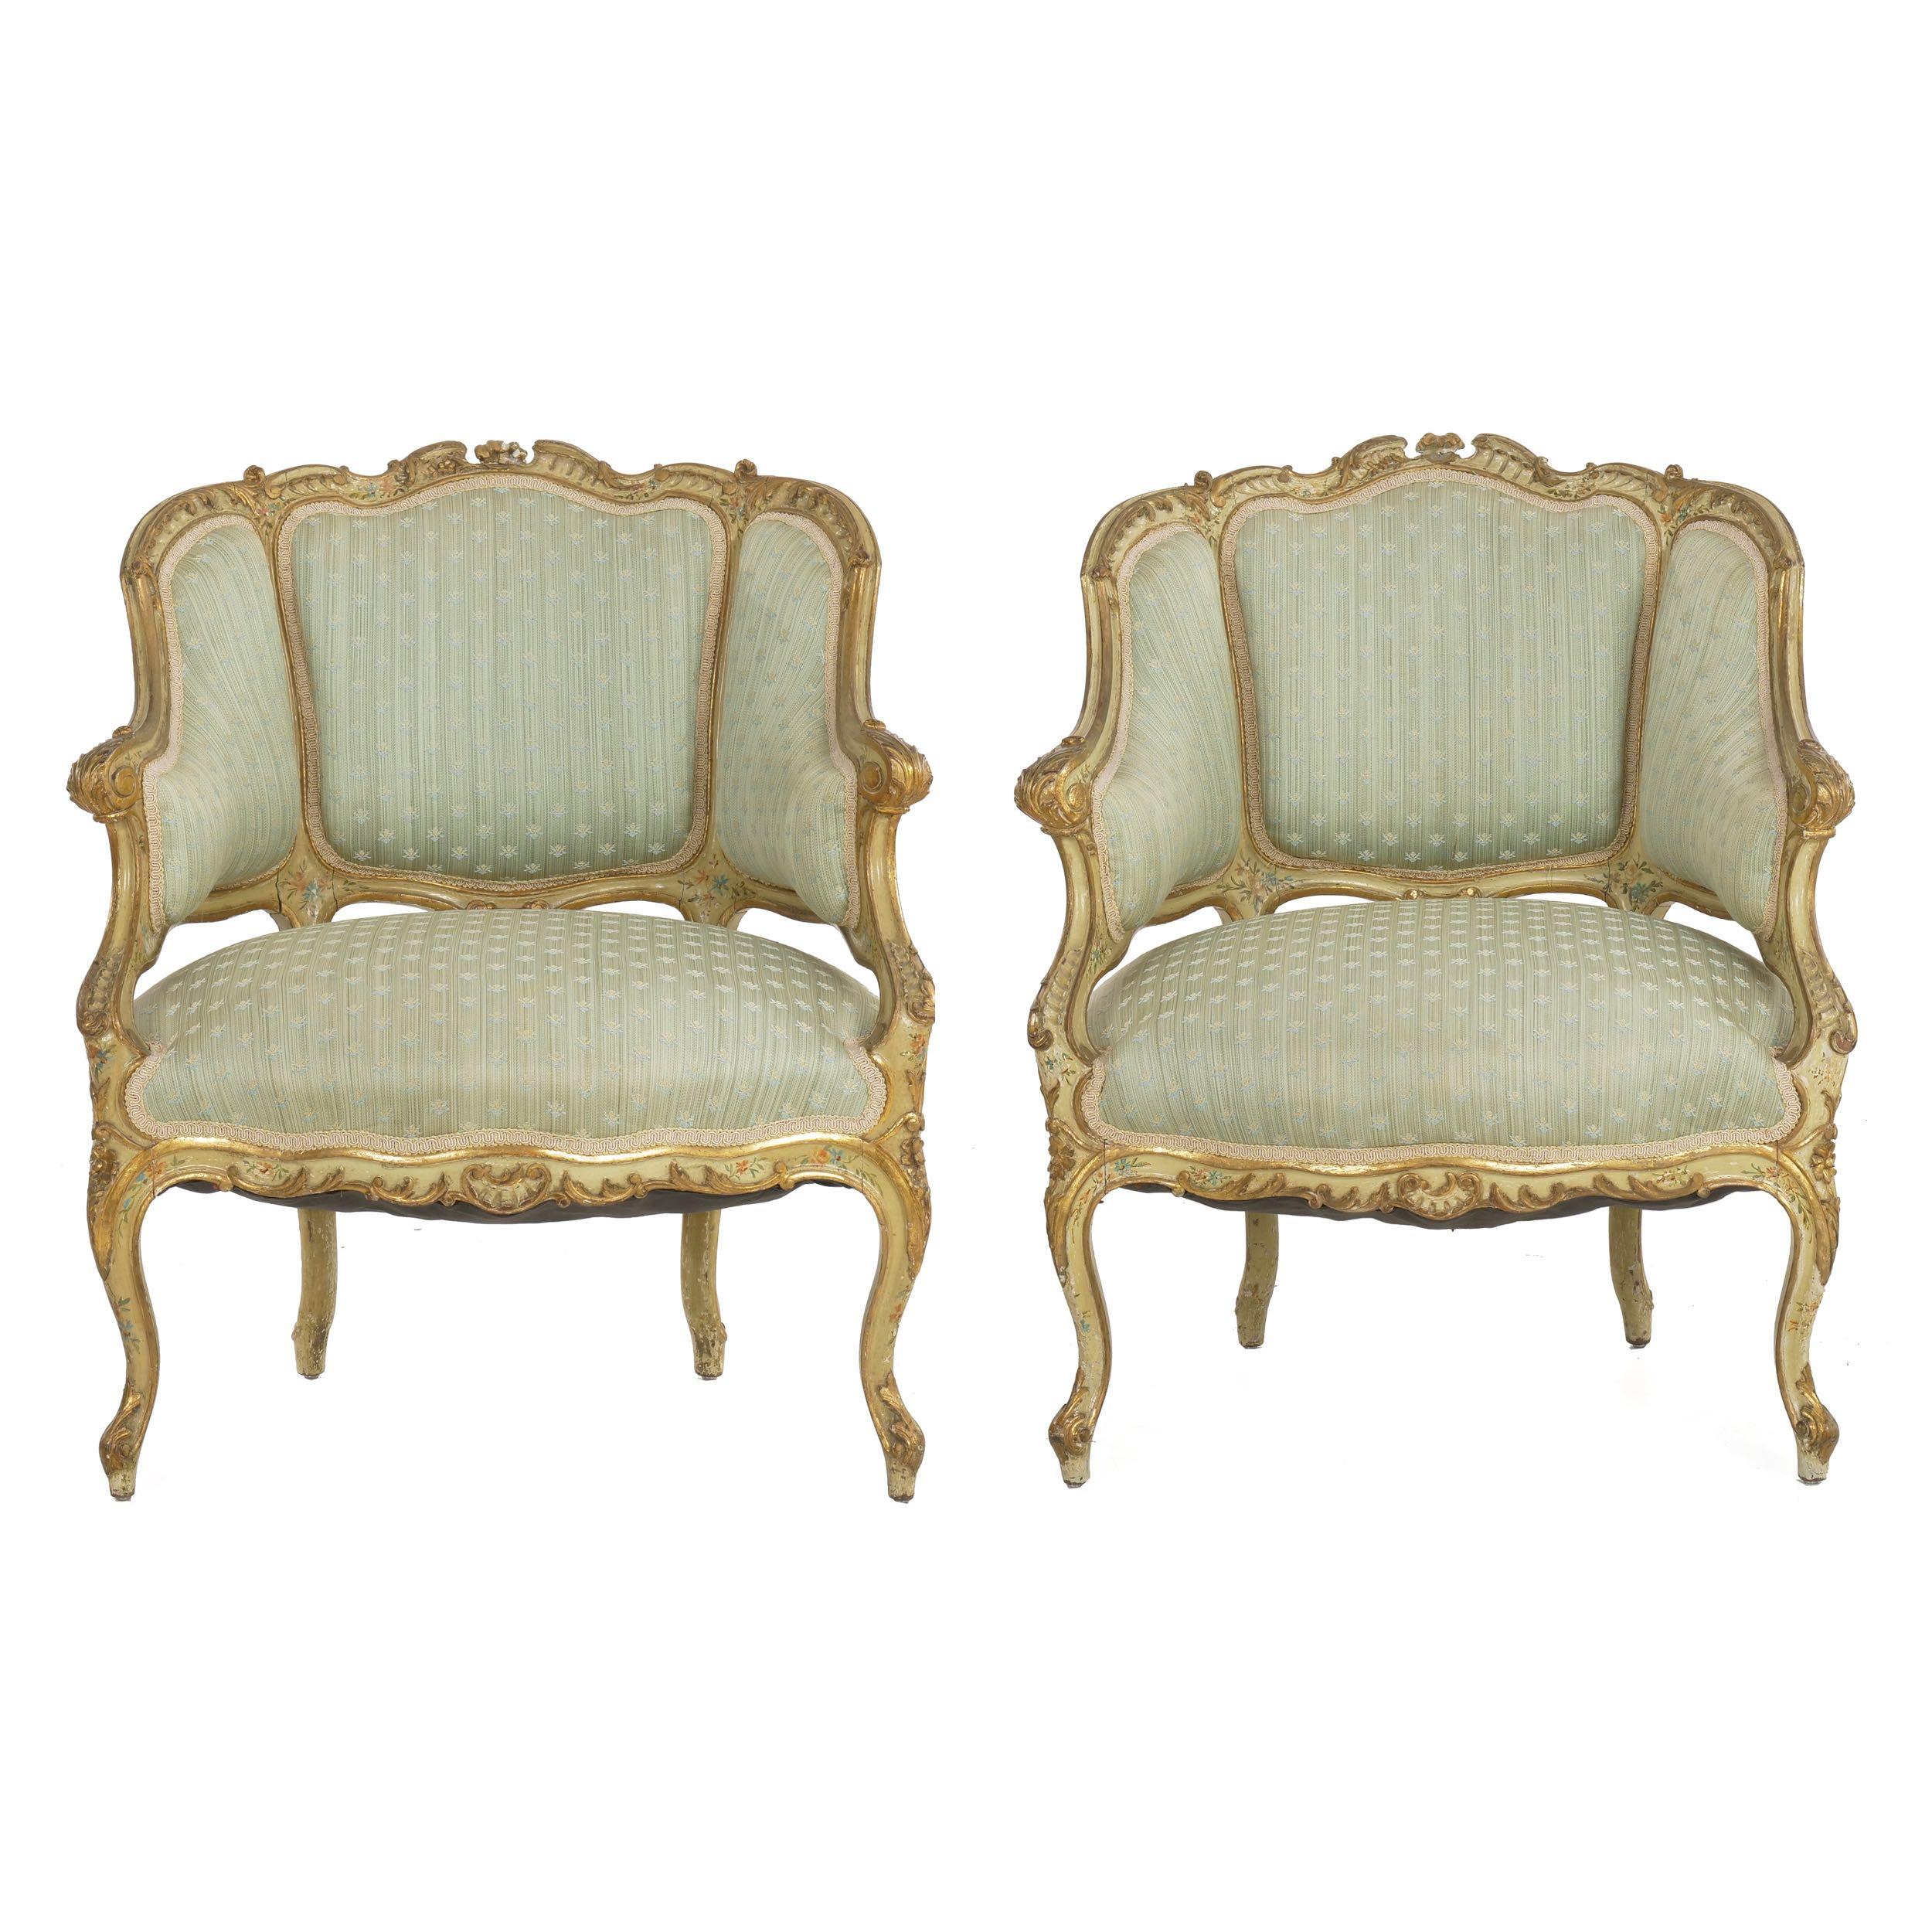 Pair of Venetian style carved and polychromed armchairs
Continental, circa late 19th-early 20th century
Item # 010NCB06P  

An attractive and whimsical pair of armchairs in the Venetian taste, they feature an overall Rococo motif of carving with